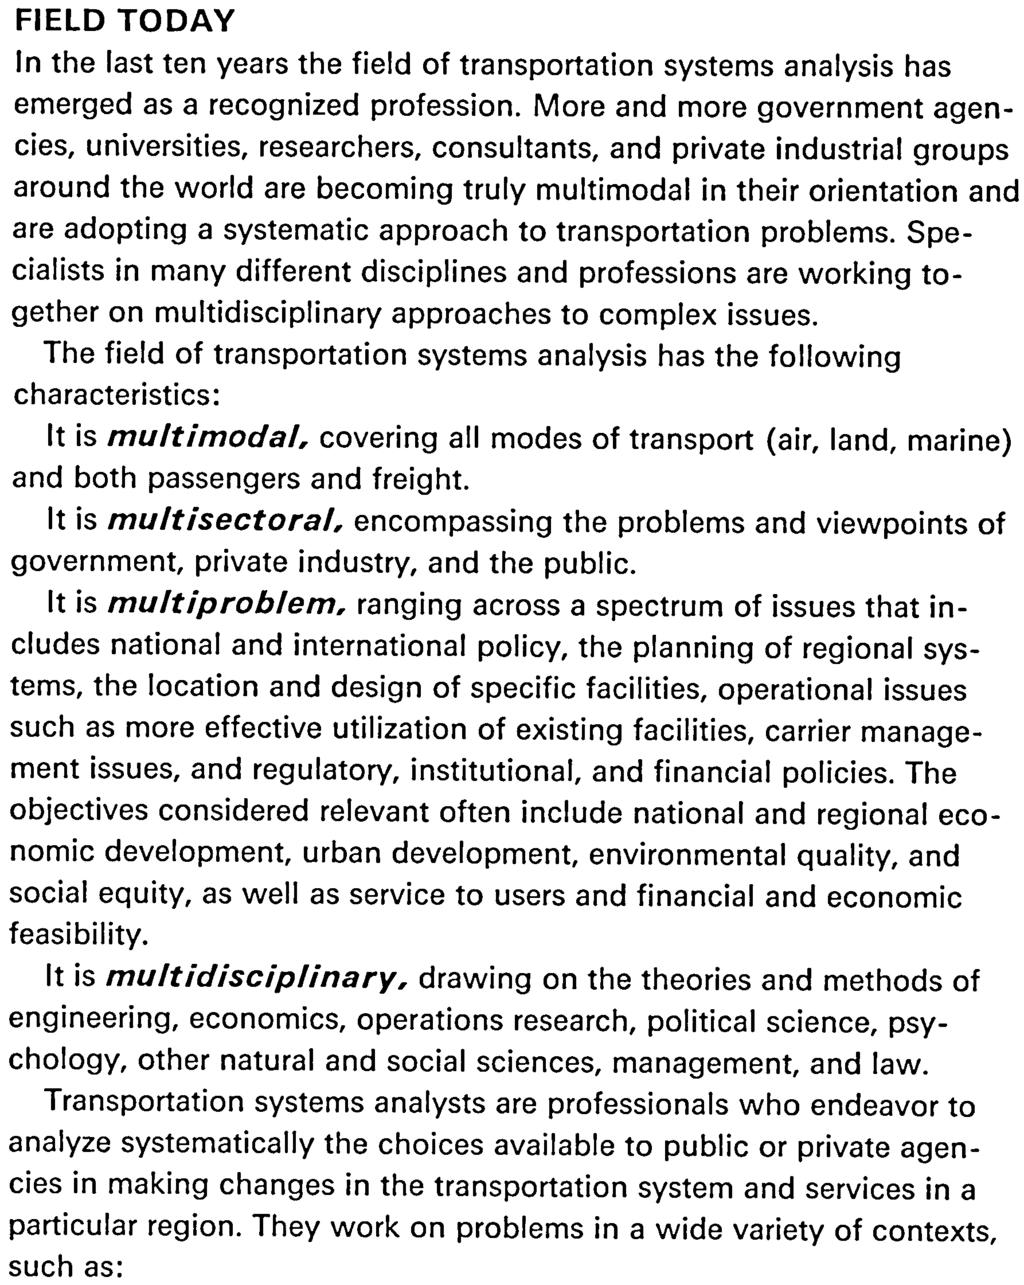 J- m Prologue Profession of Transportation Systems Analysis FIELD TODAY In the last ten years the field of transportation systems analysis has emerged as a recognized profession.